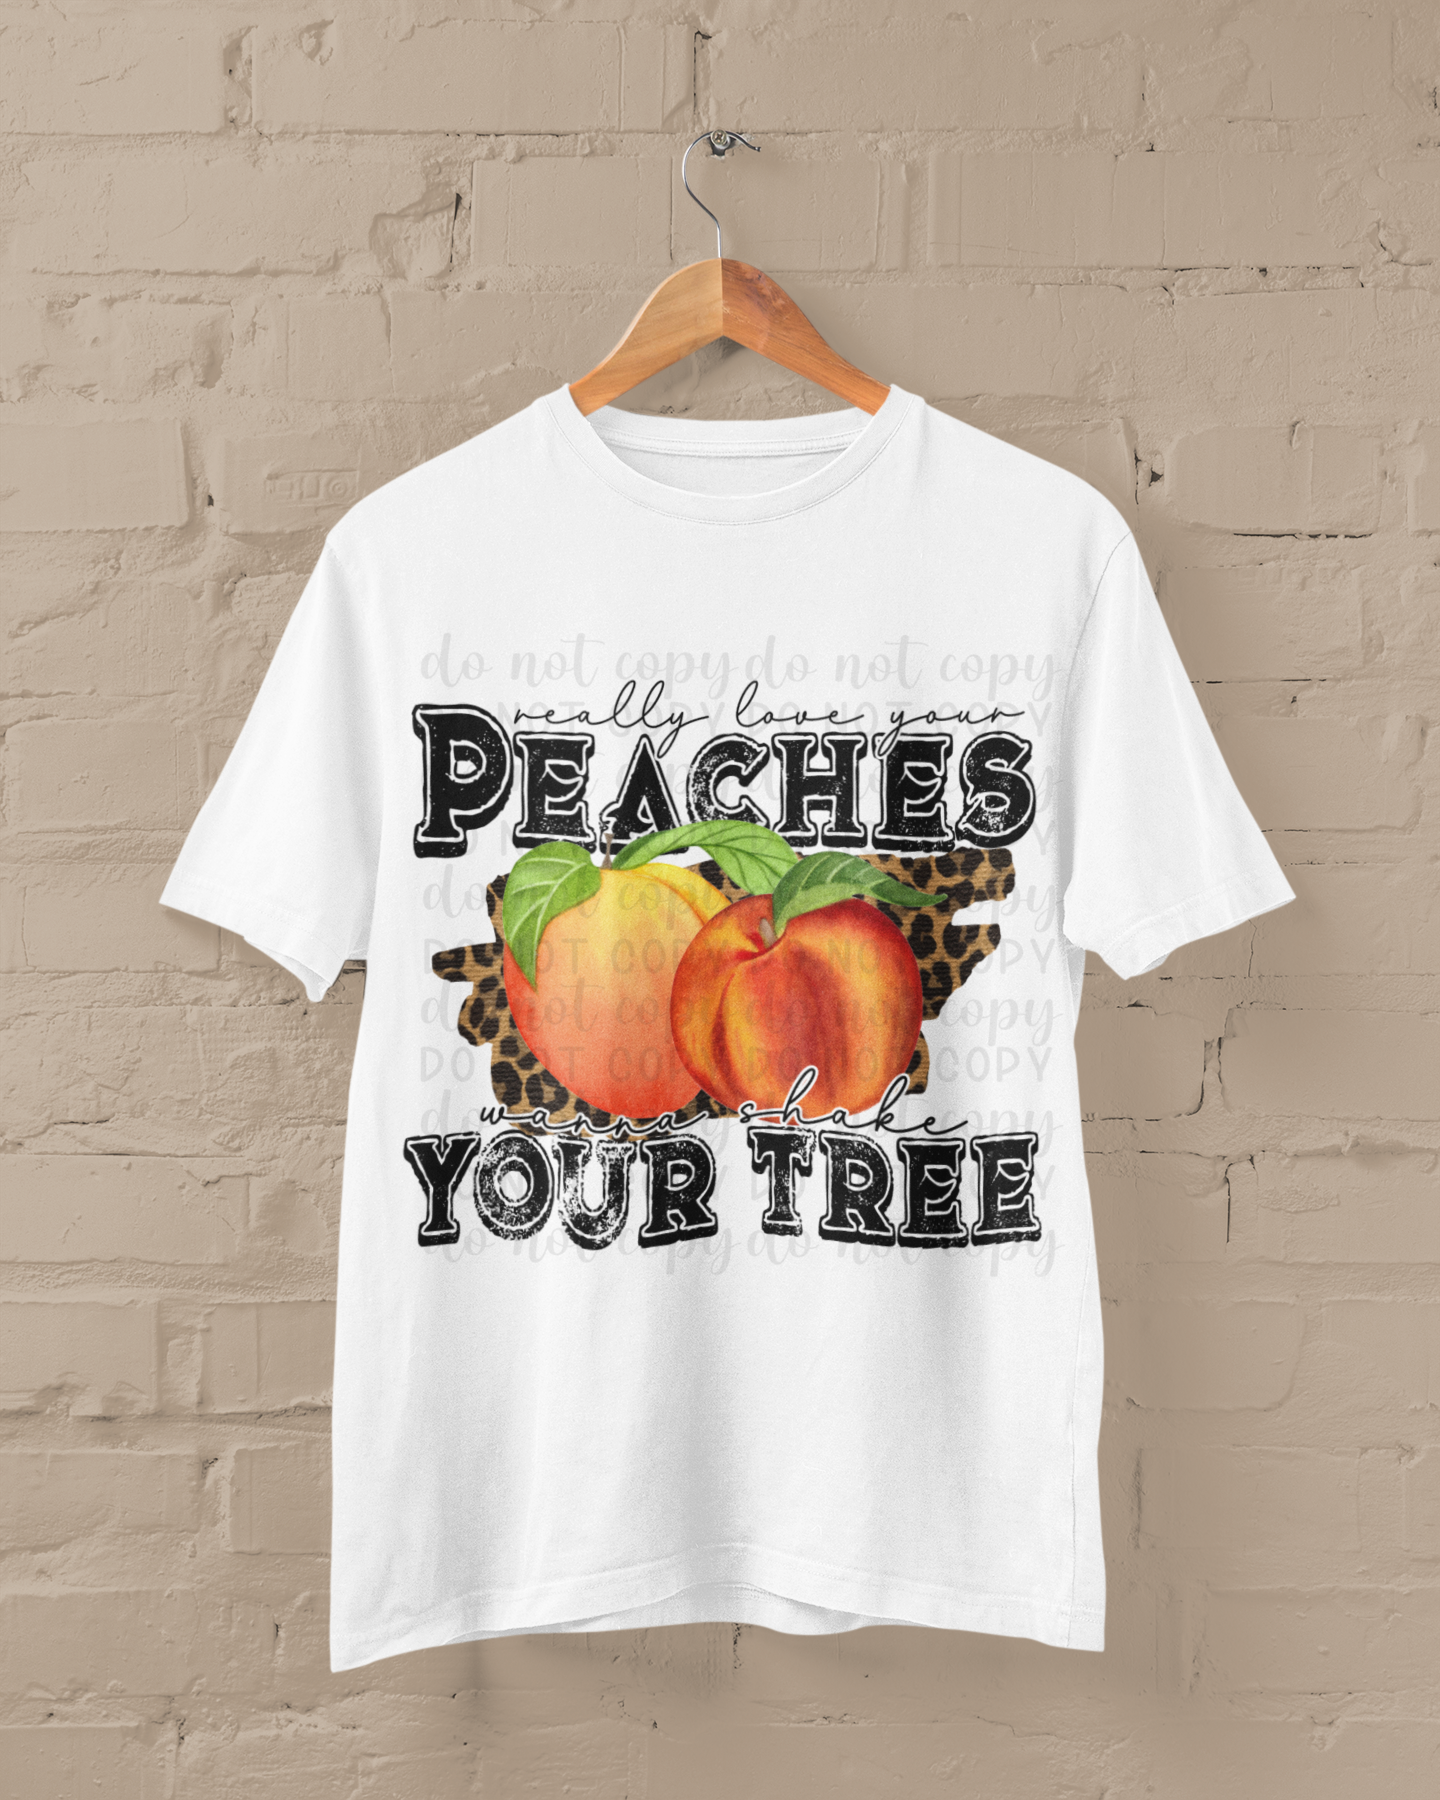 Really love your peaches